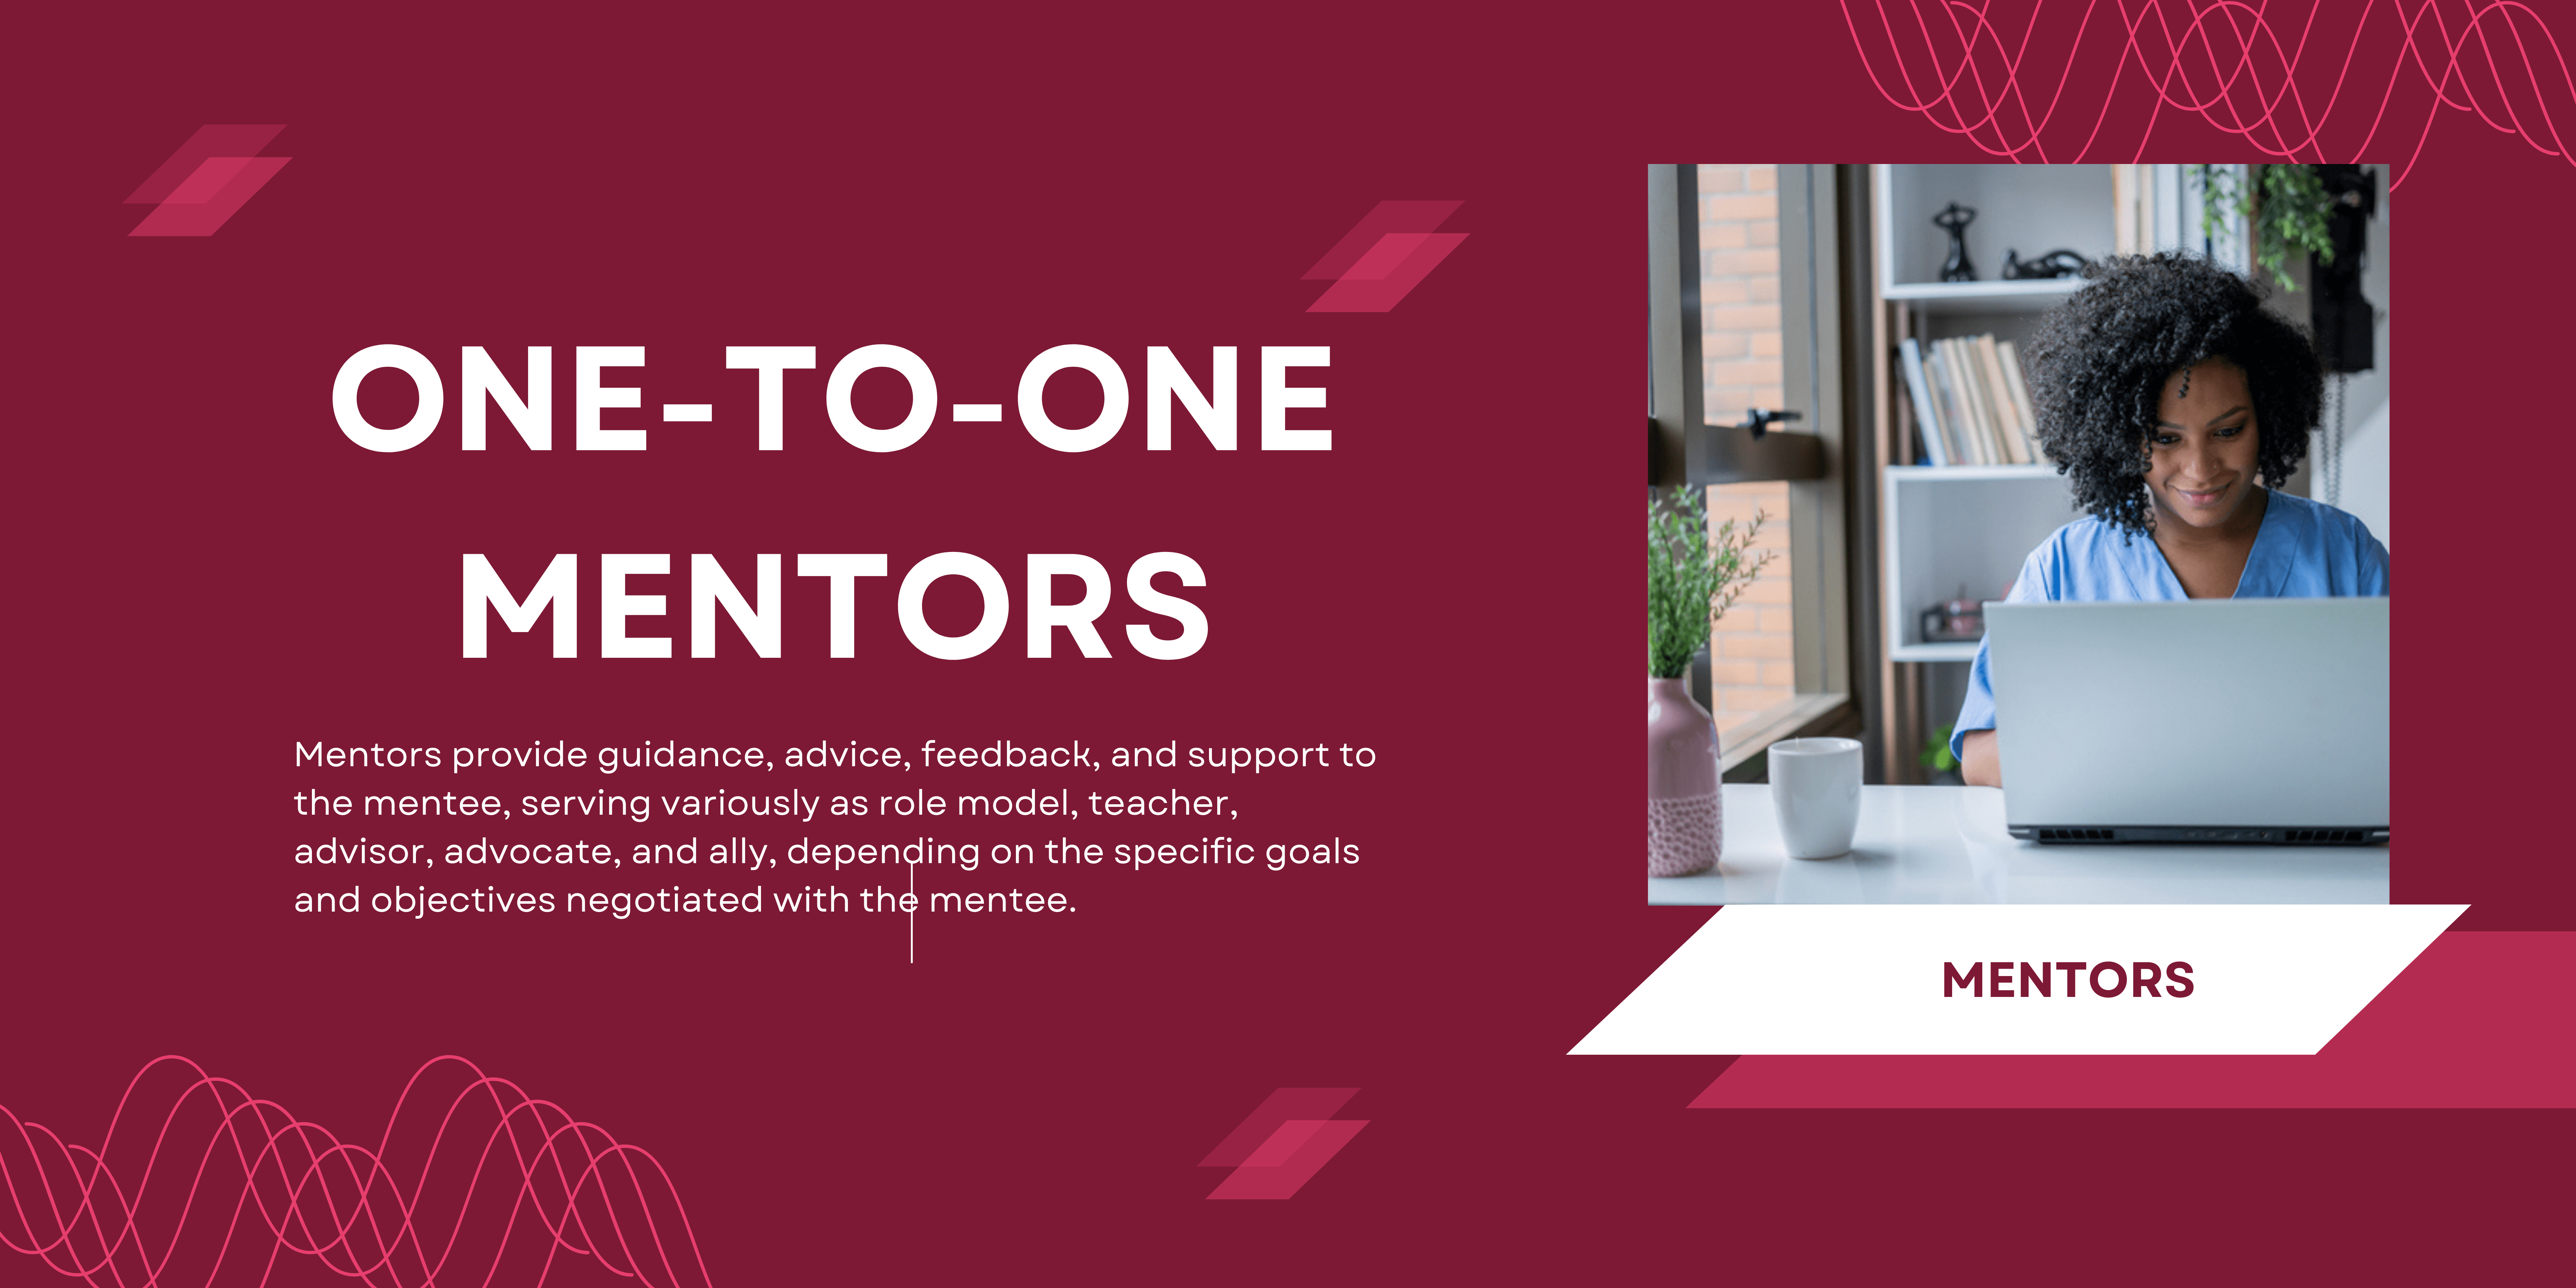 One-to-One Mentors